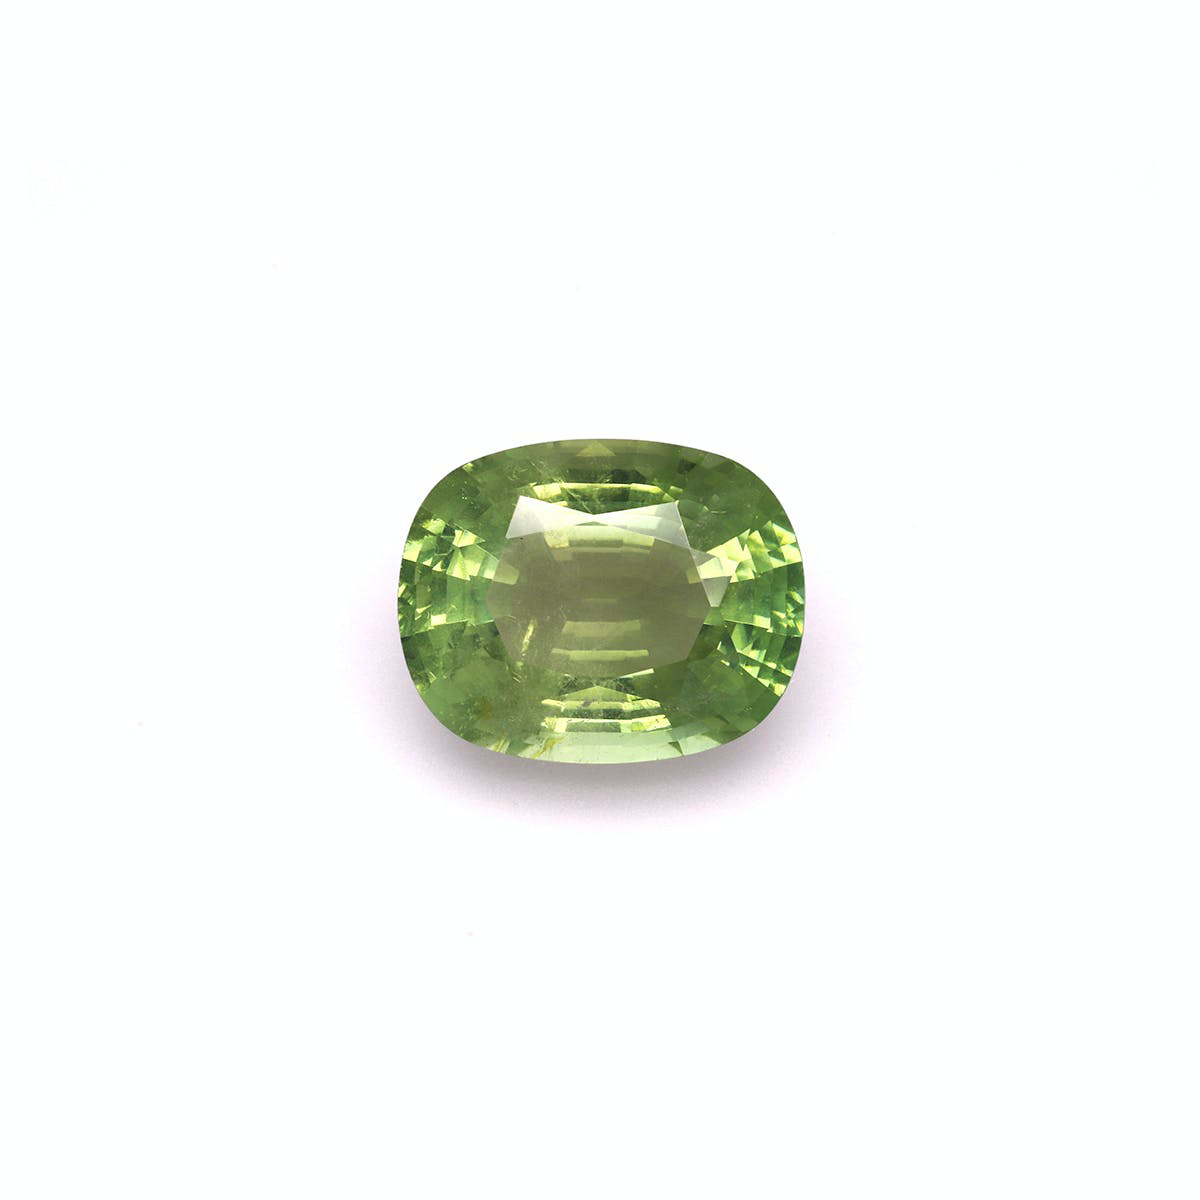 Picture of Pistachio Green Tourmaline 15.14ct (TG0102)